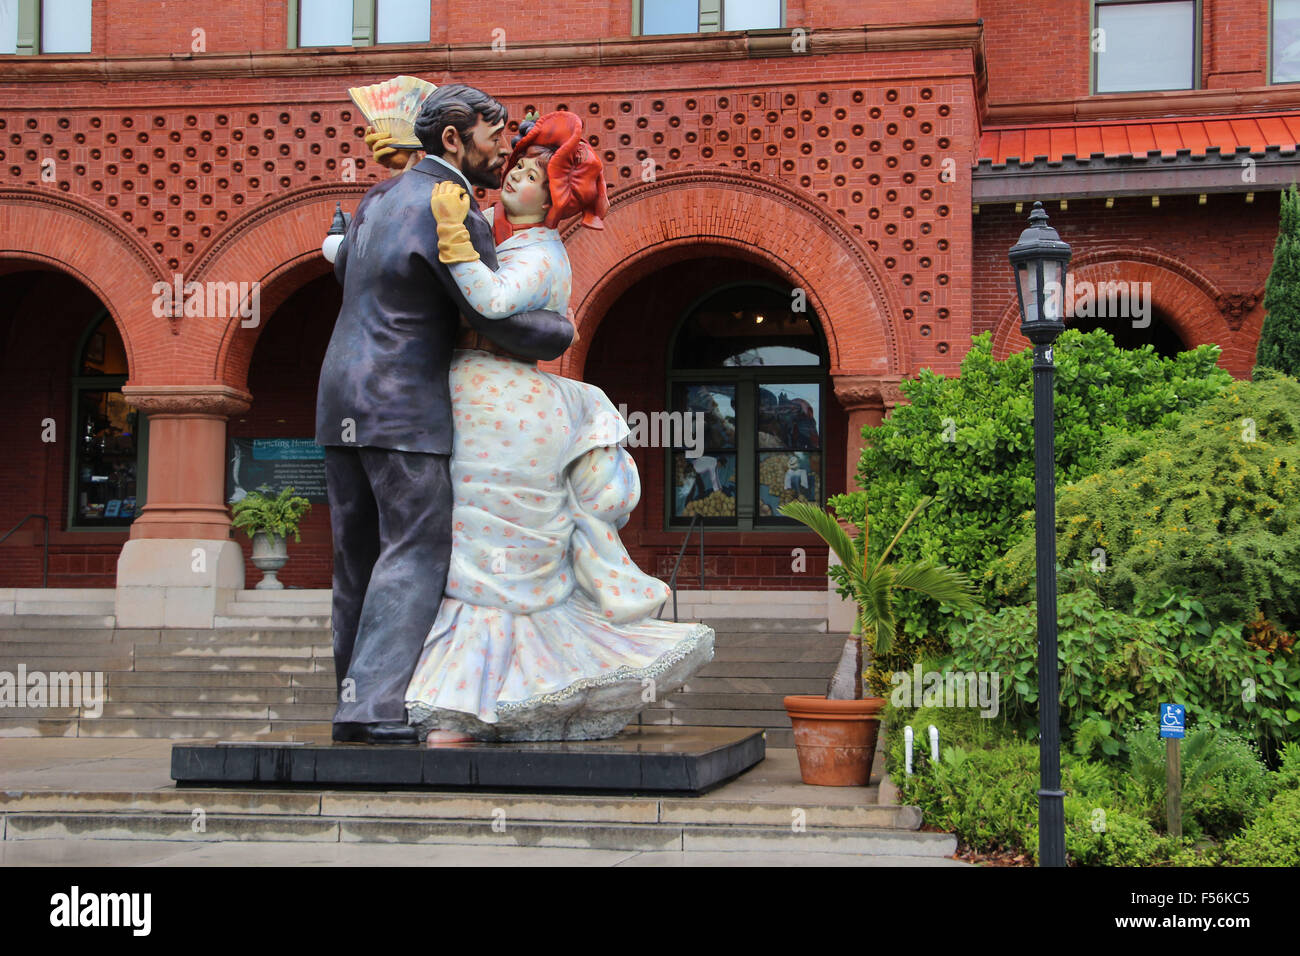 gigantic dancing couple, ballroom dancers statute in key west art and history museum or old post office and custom house Florida Stock Photo